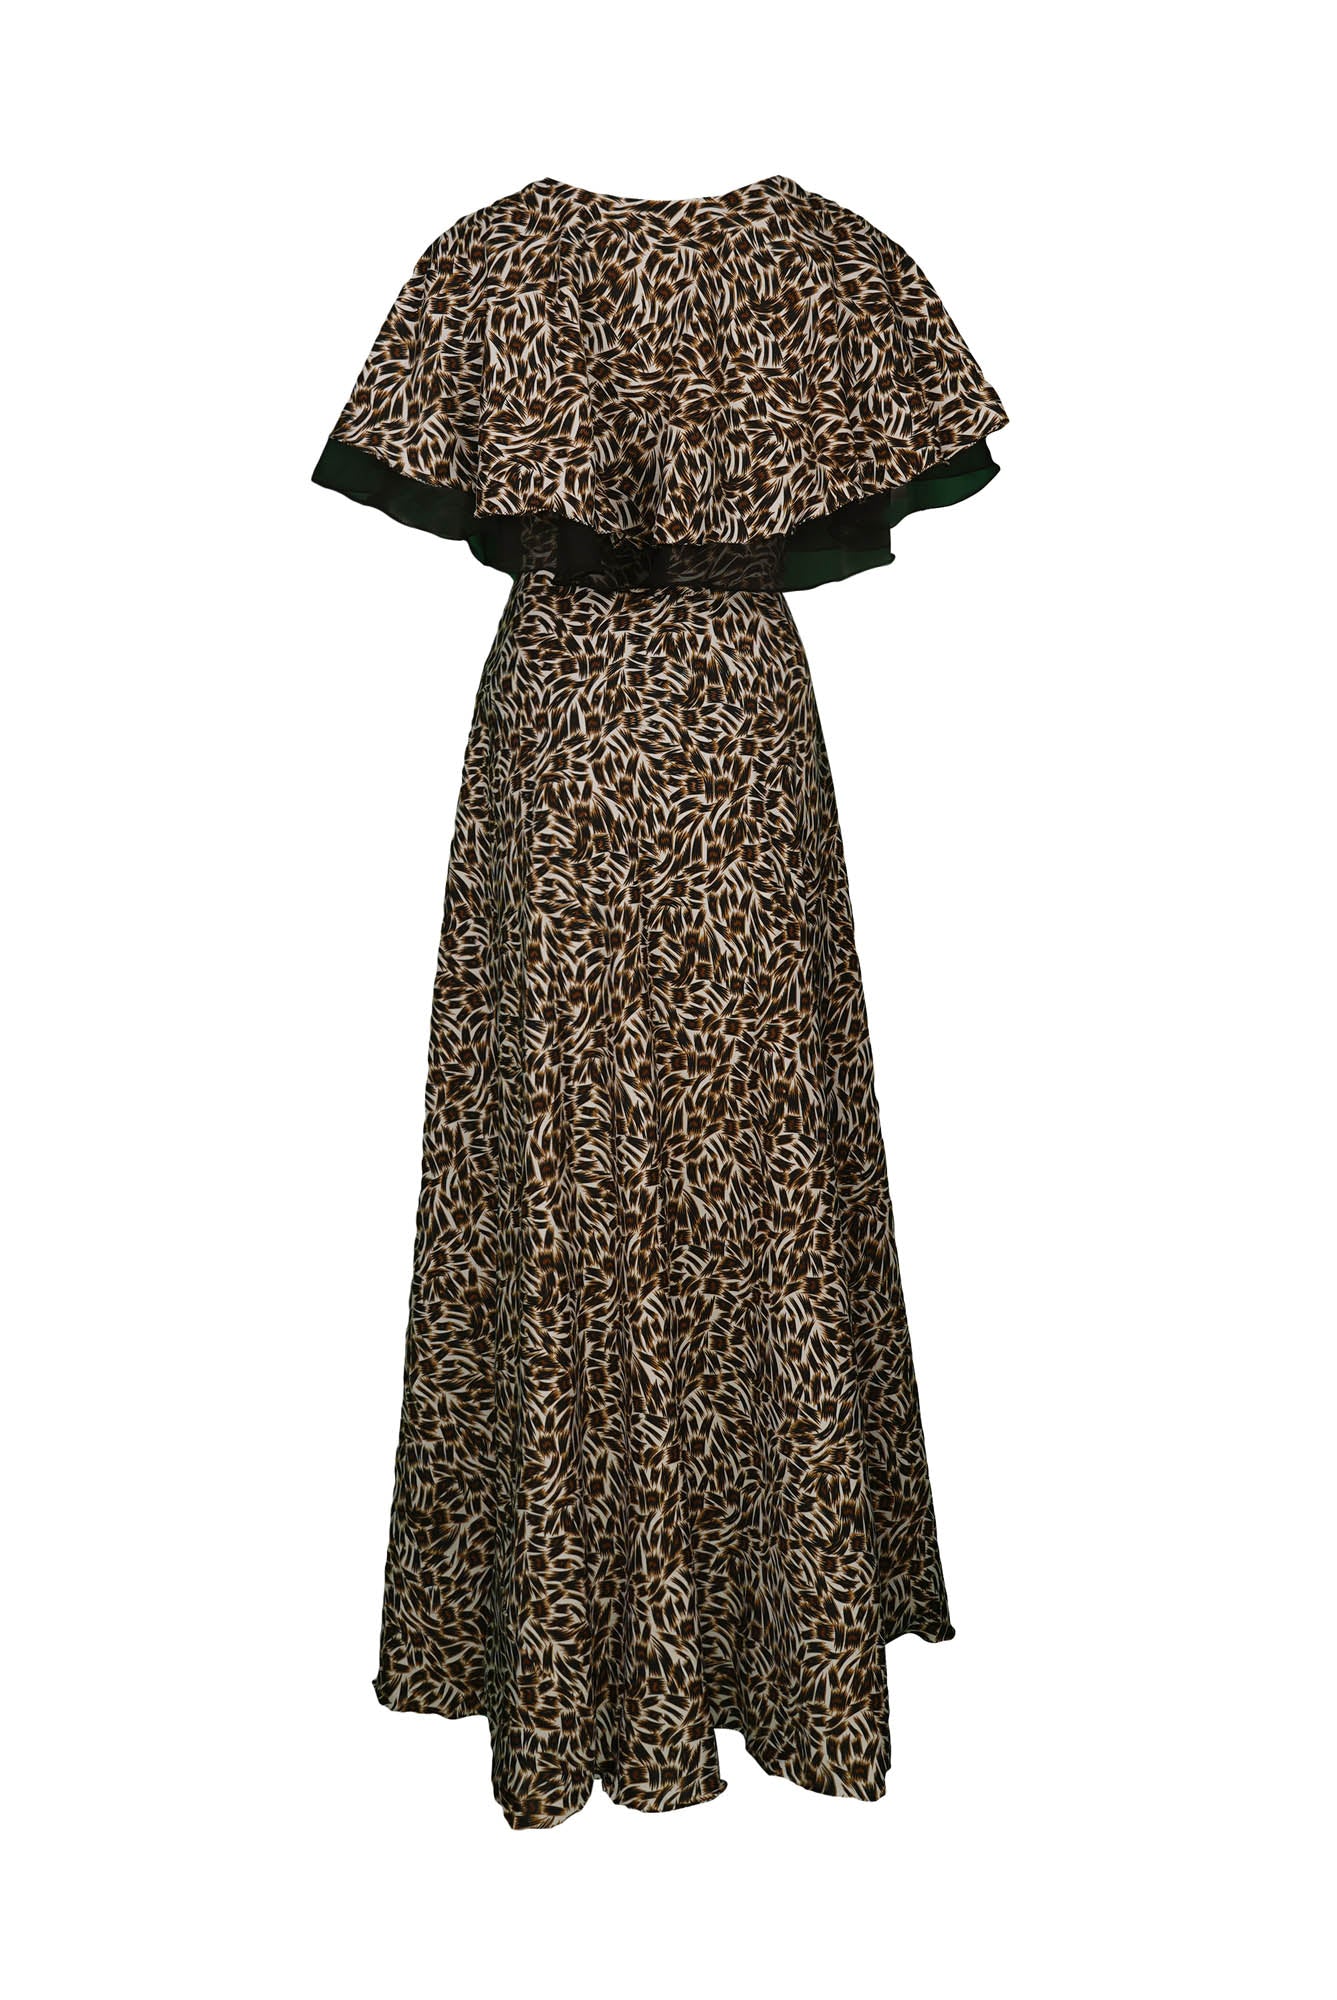 ZIA024 Animal Printed Flared Gown with Black Flares